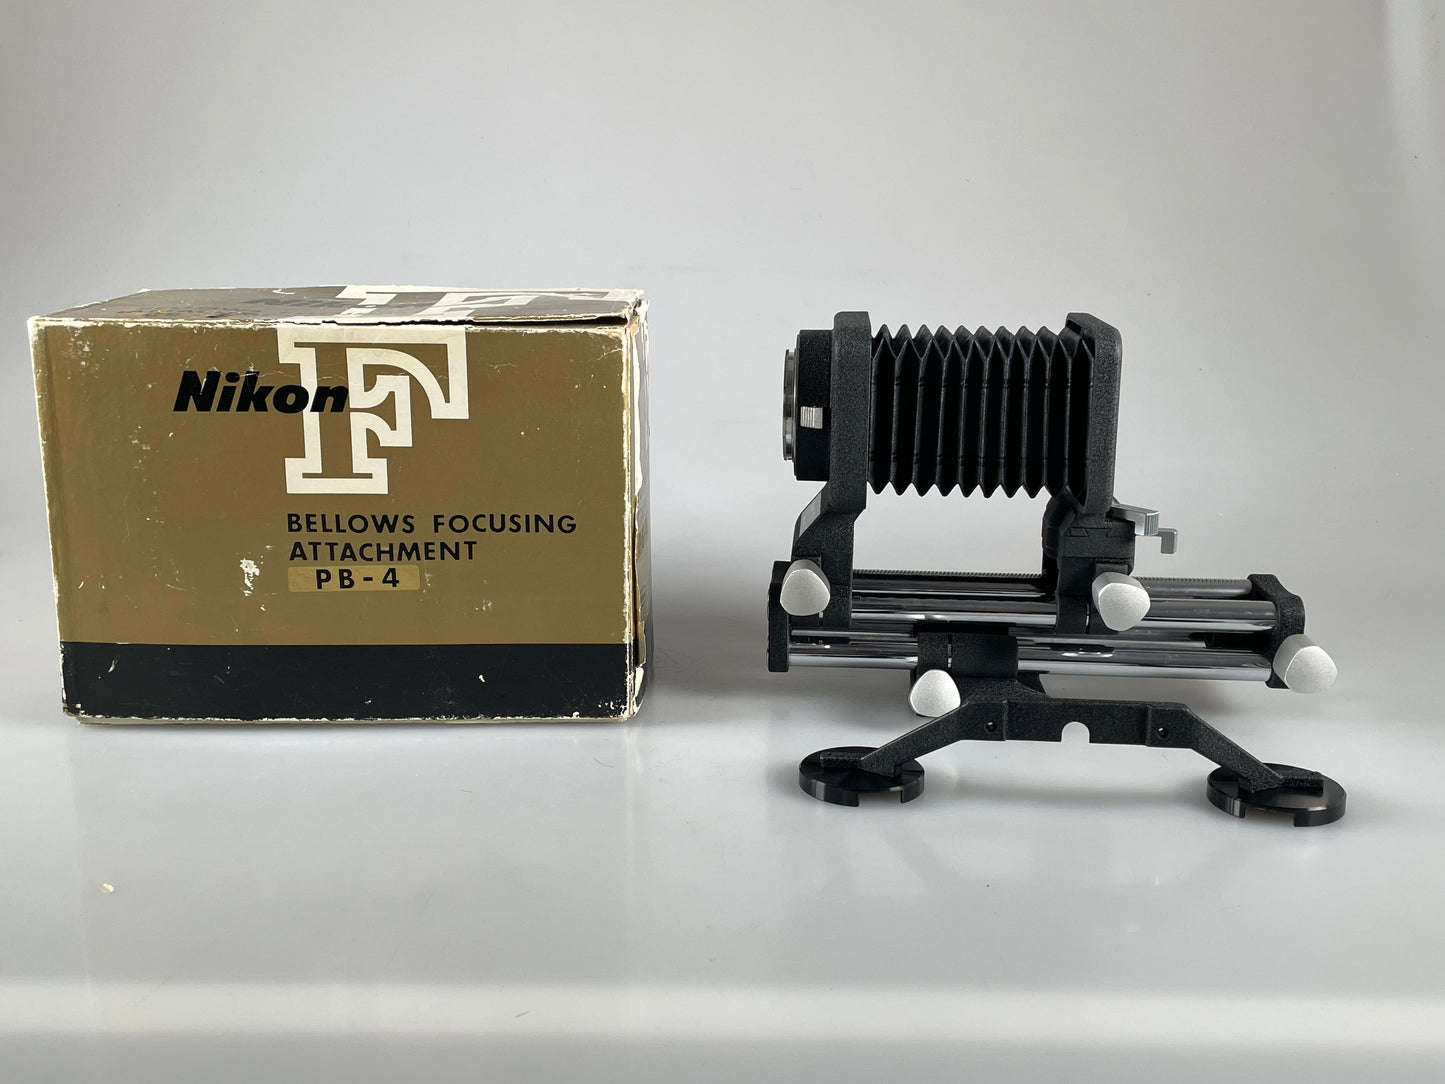 Nikon PS-4 Slide Copying Adapter with PB-4 Bellows